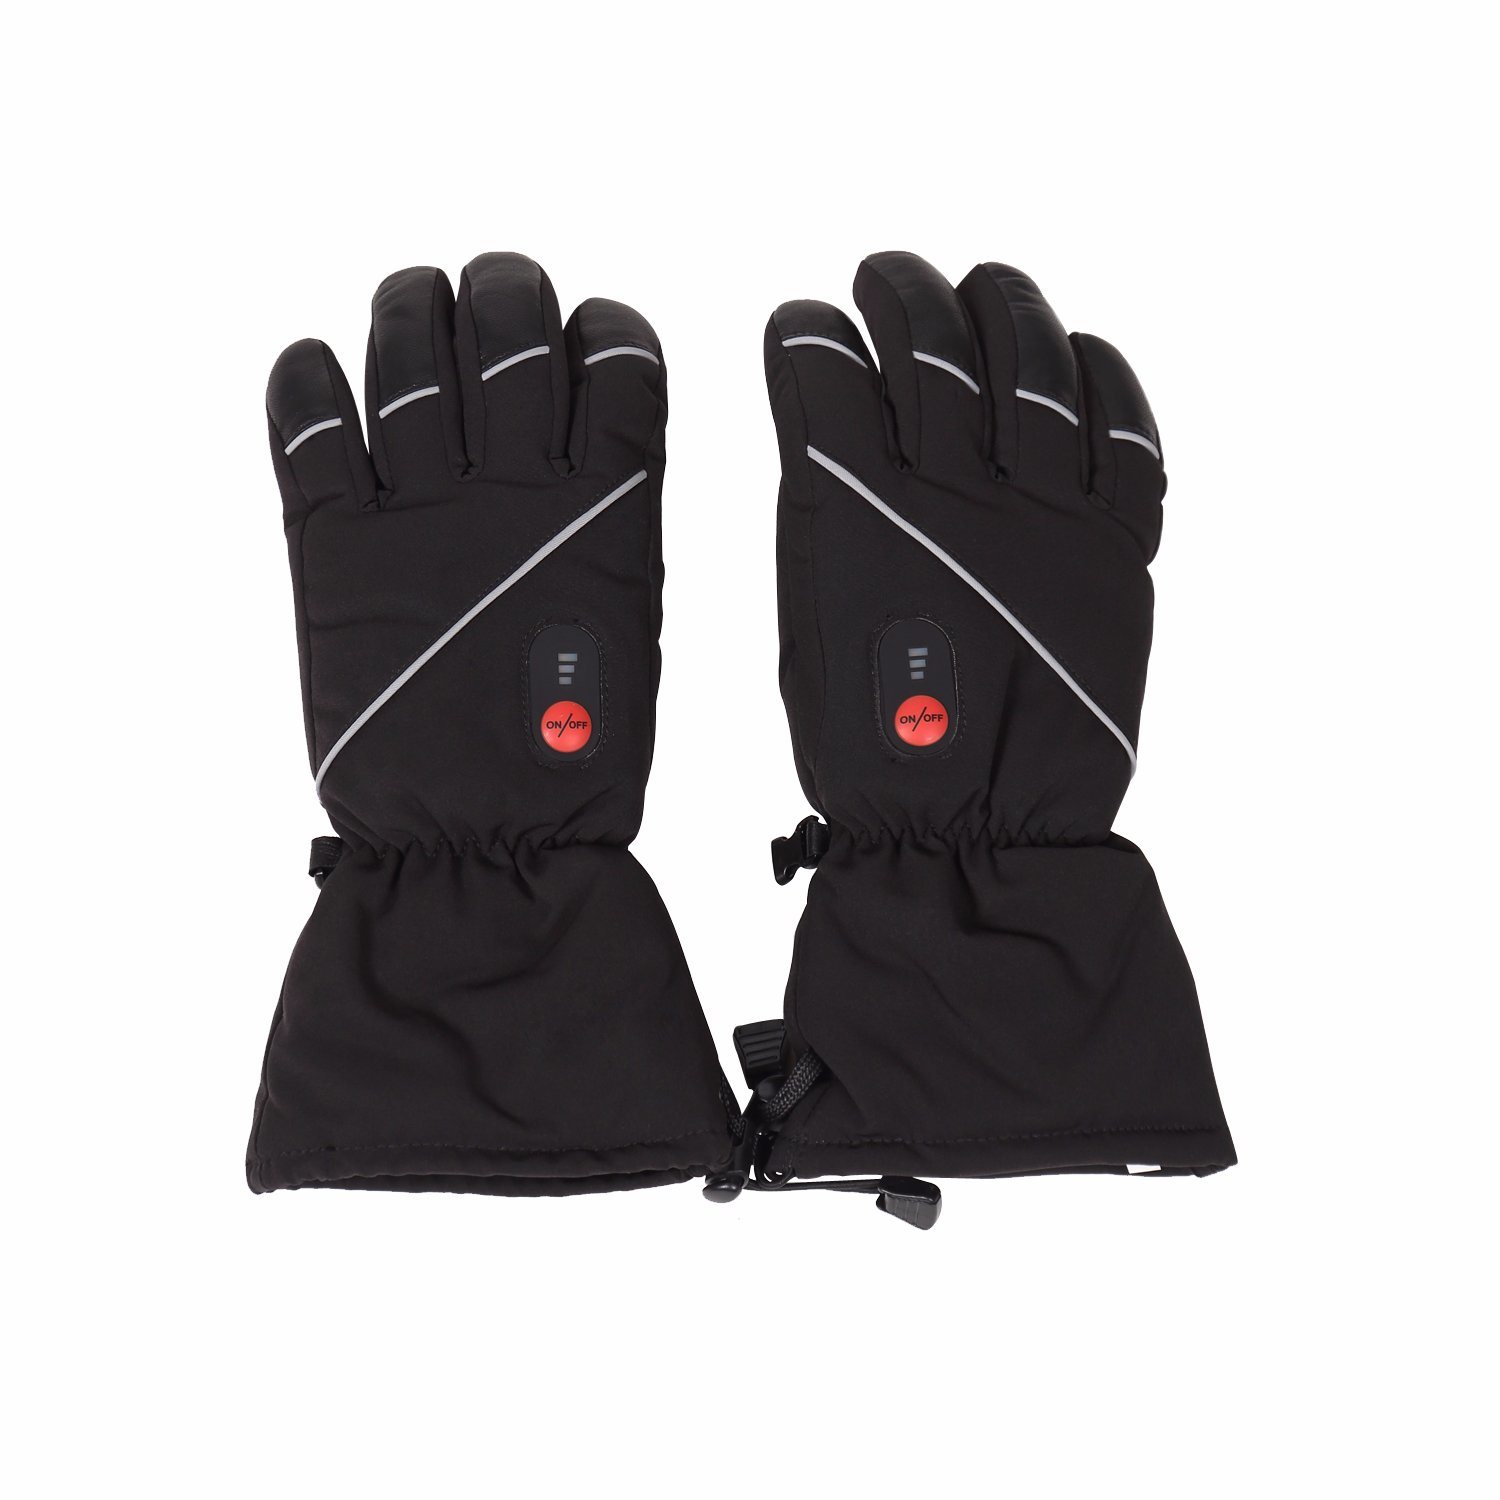 Far-infrared Heating Gloves for Cold Winter